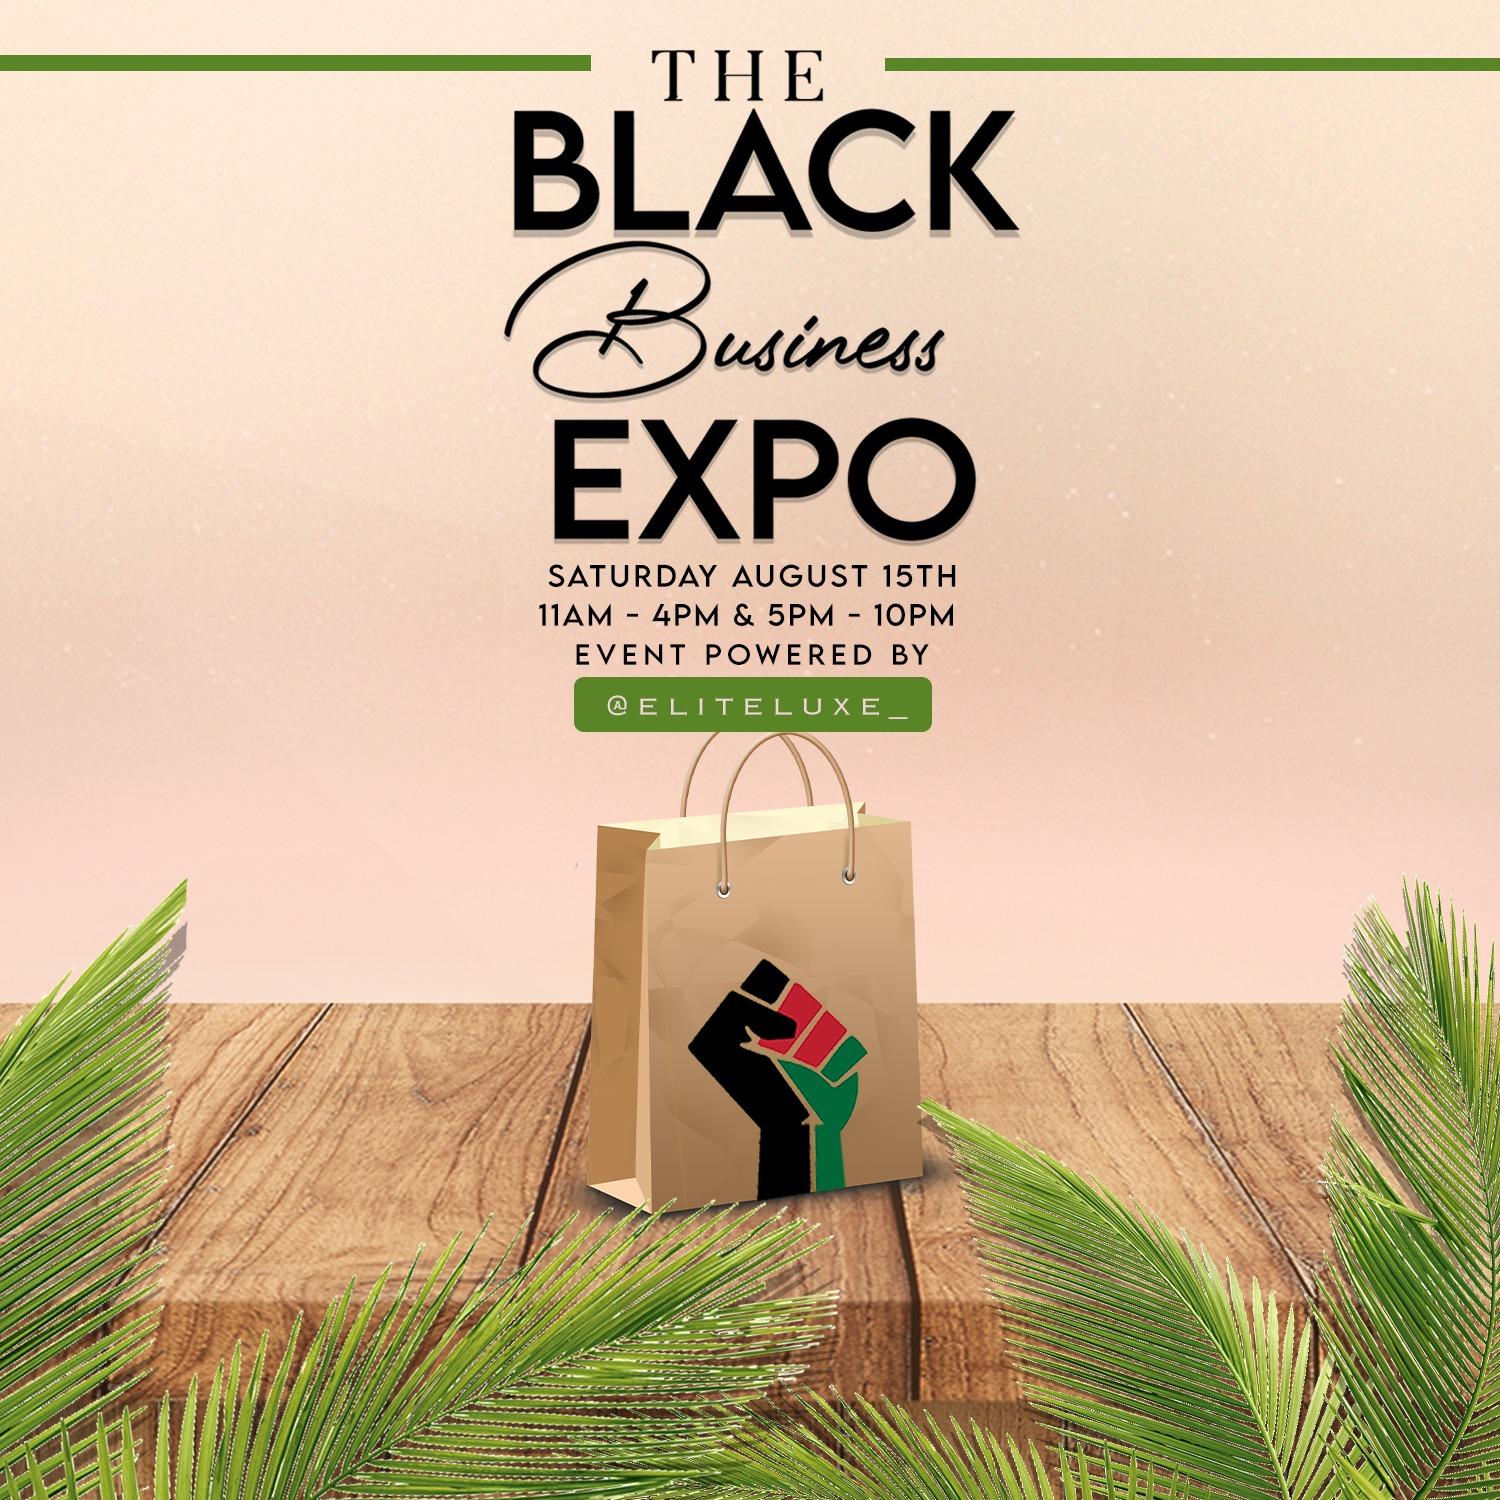 The Black Business Expo